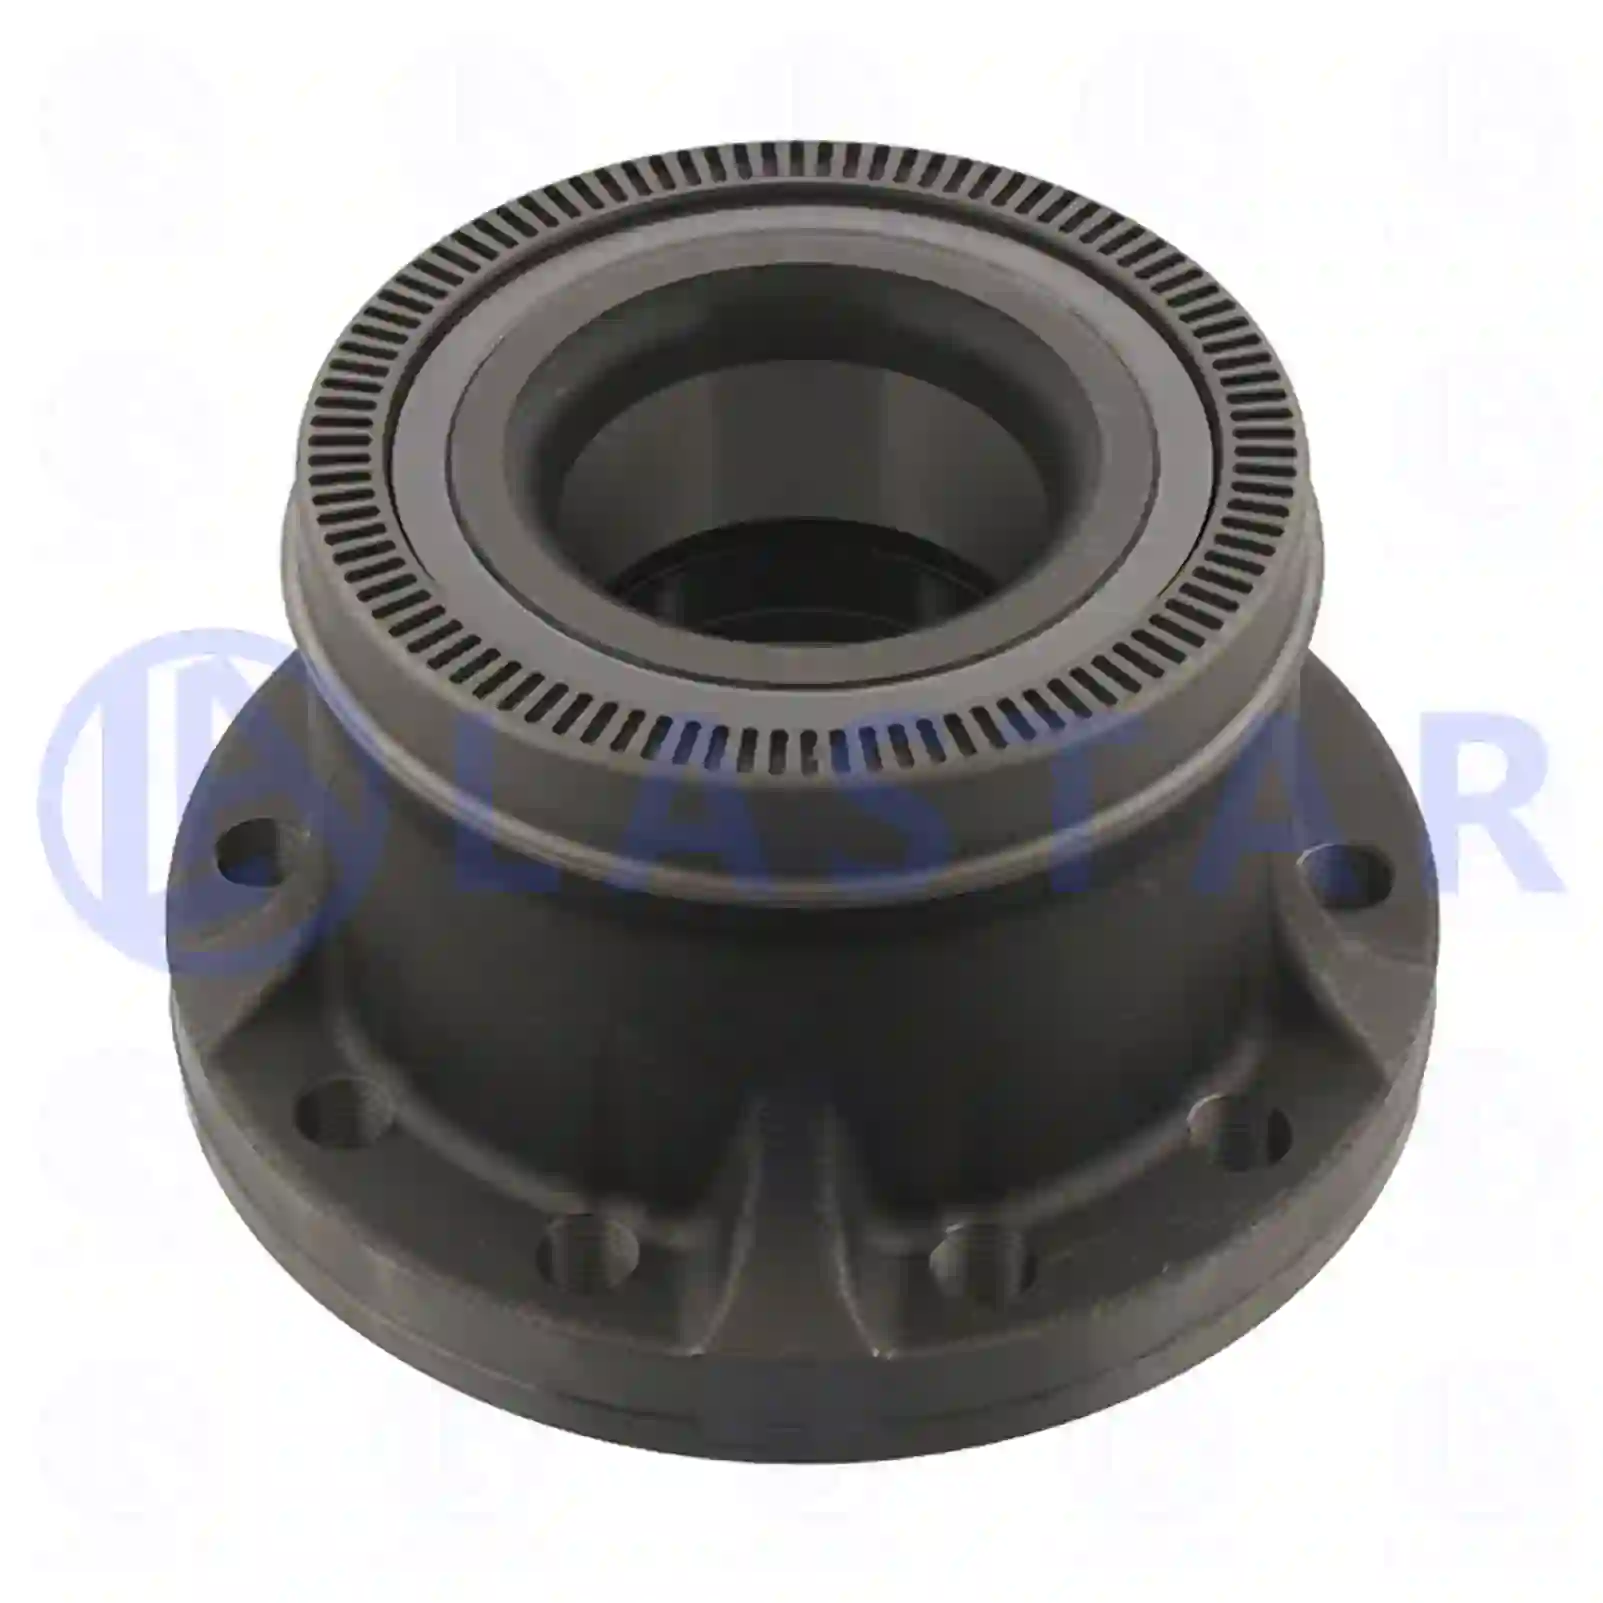 Wheel bearing unit, with ABS ring, 77726169, 504189654, 5010439770, 5010439770, 20764313, ZG30198-0008 ||  77726169 Lastar Spare Part | Truck Spare Parts, Auotomotive Spare Parts Wheel bearing unit, with ABS ring, 77726169, 504189654, 5010439770, 5010439770, 20764313, ZG30198-0008 ||  77726169 Lastar Spare Part | Truck Spare Parts, Auotomotive Spare Parts